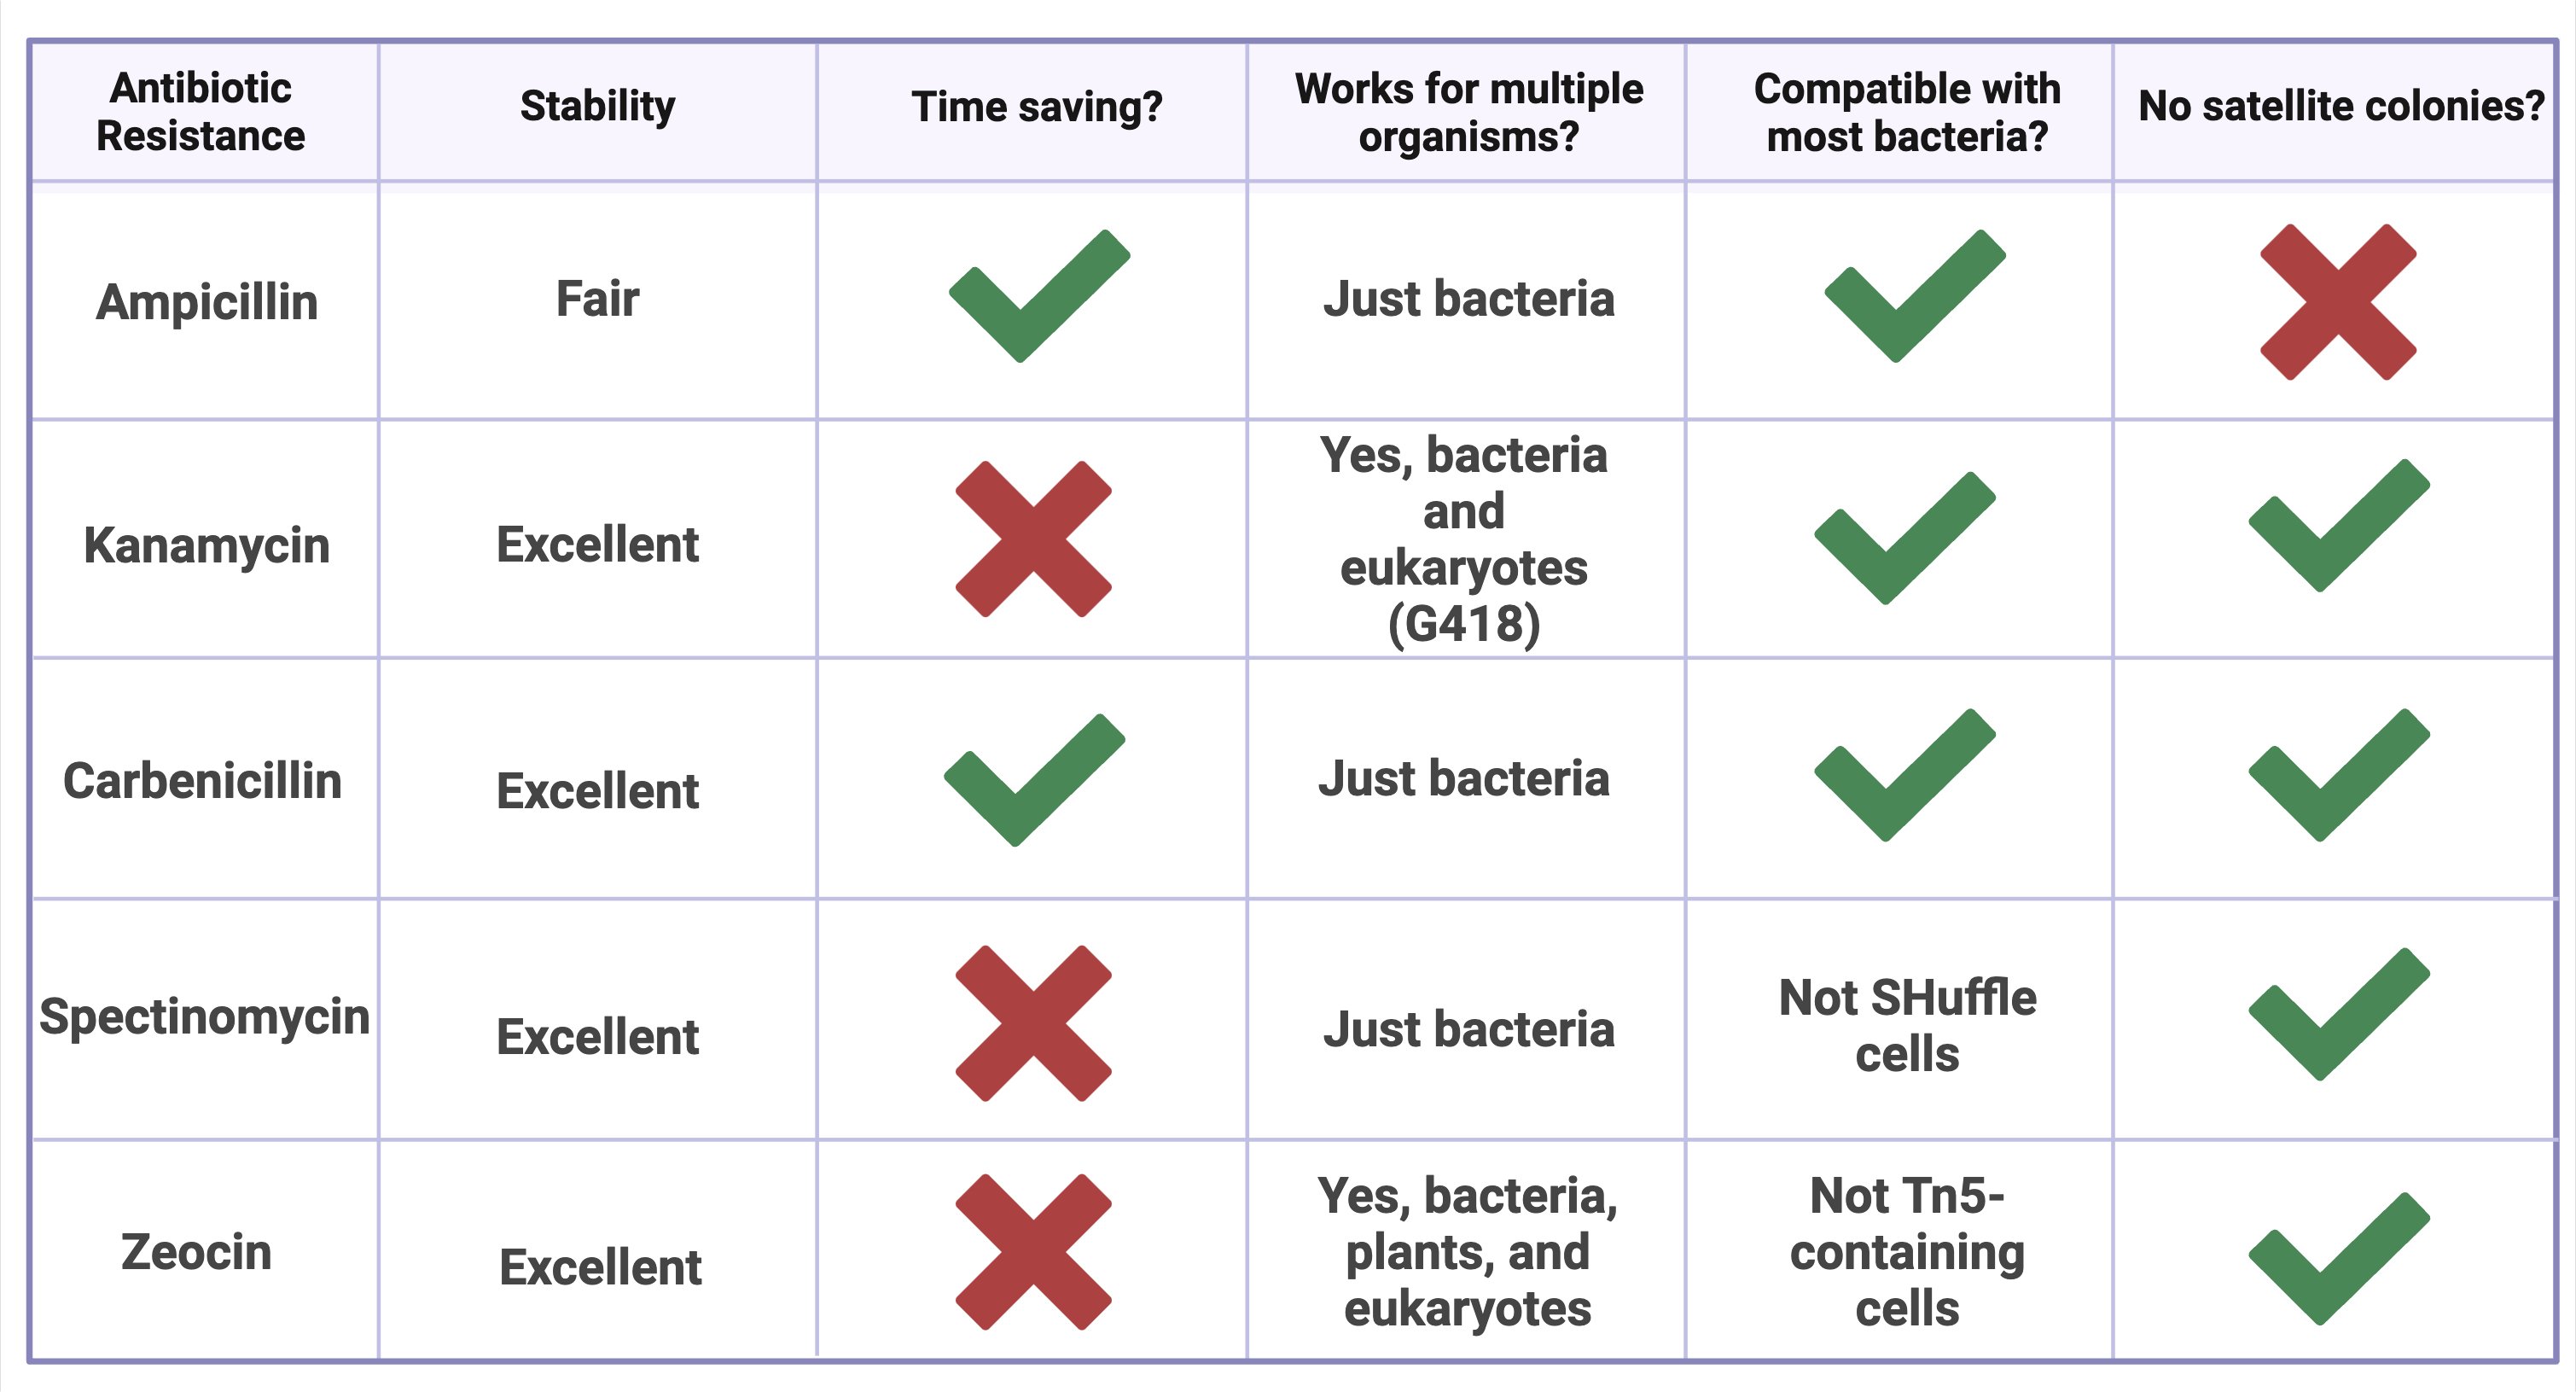 Table outlining the features described in-text of each antibiotic